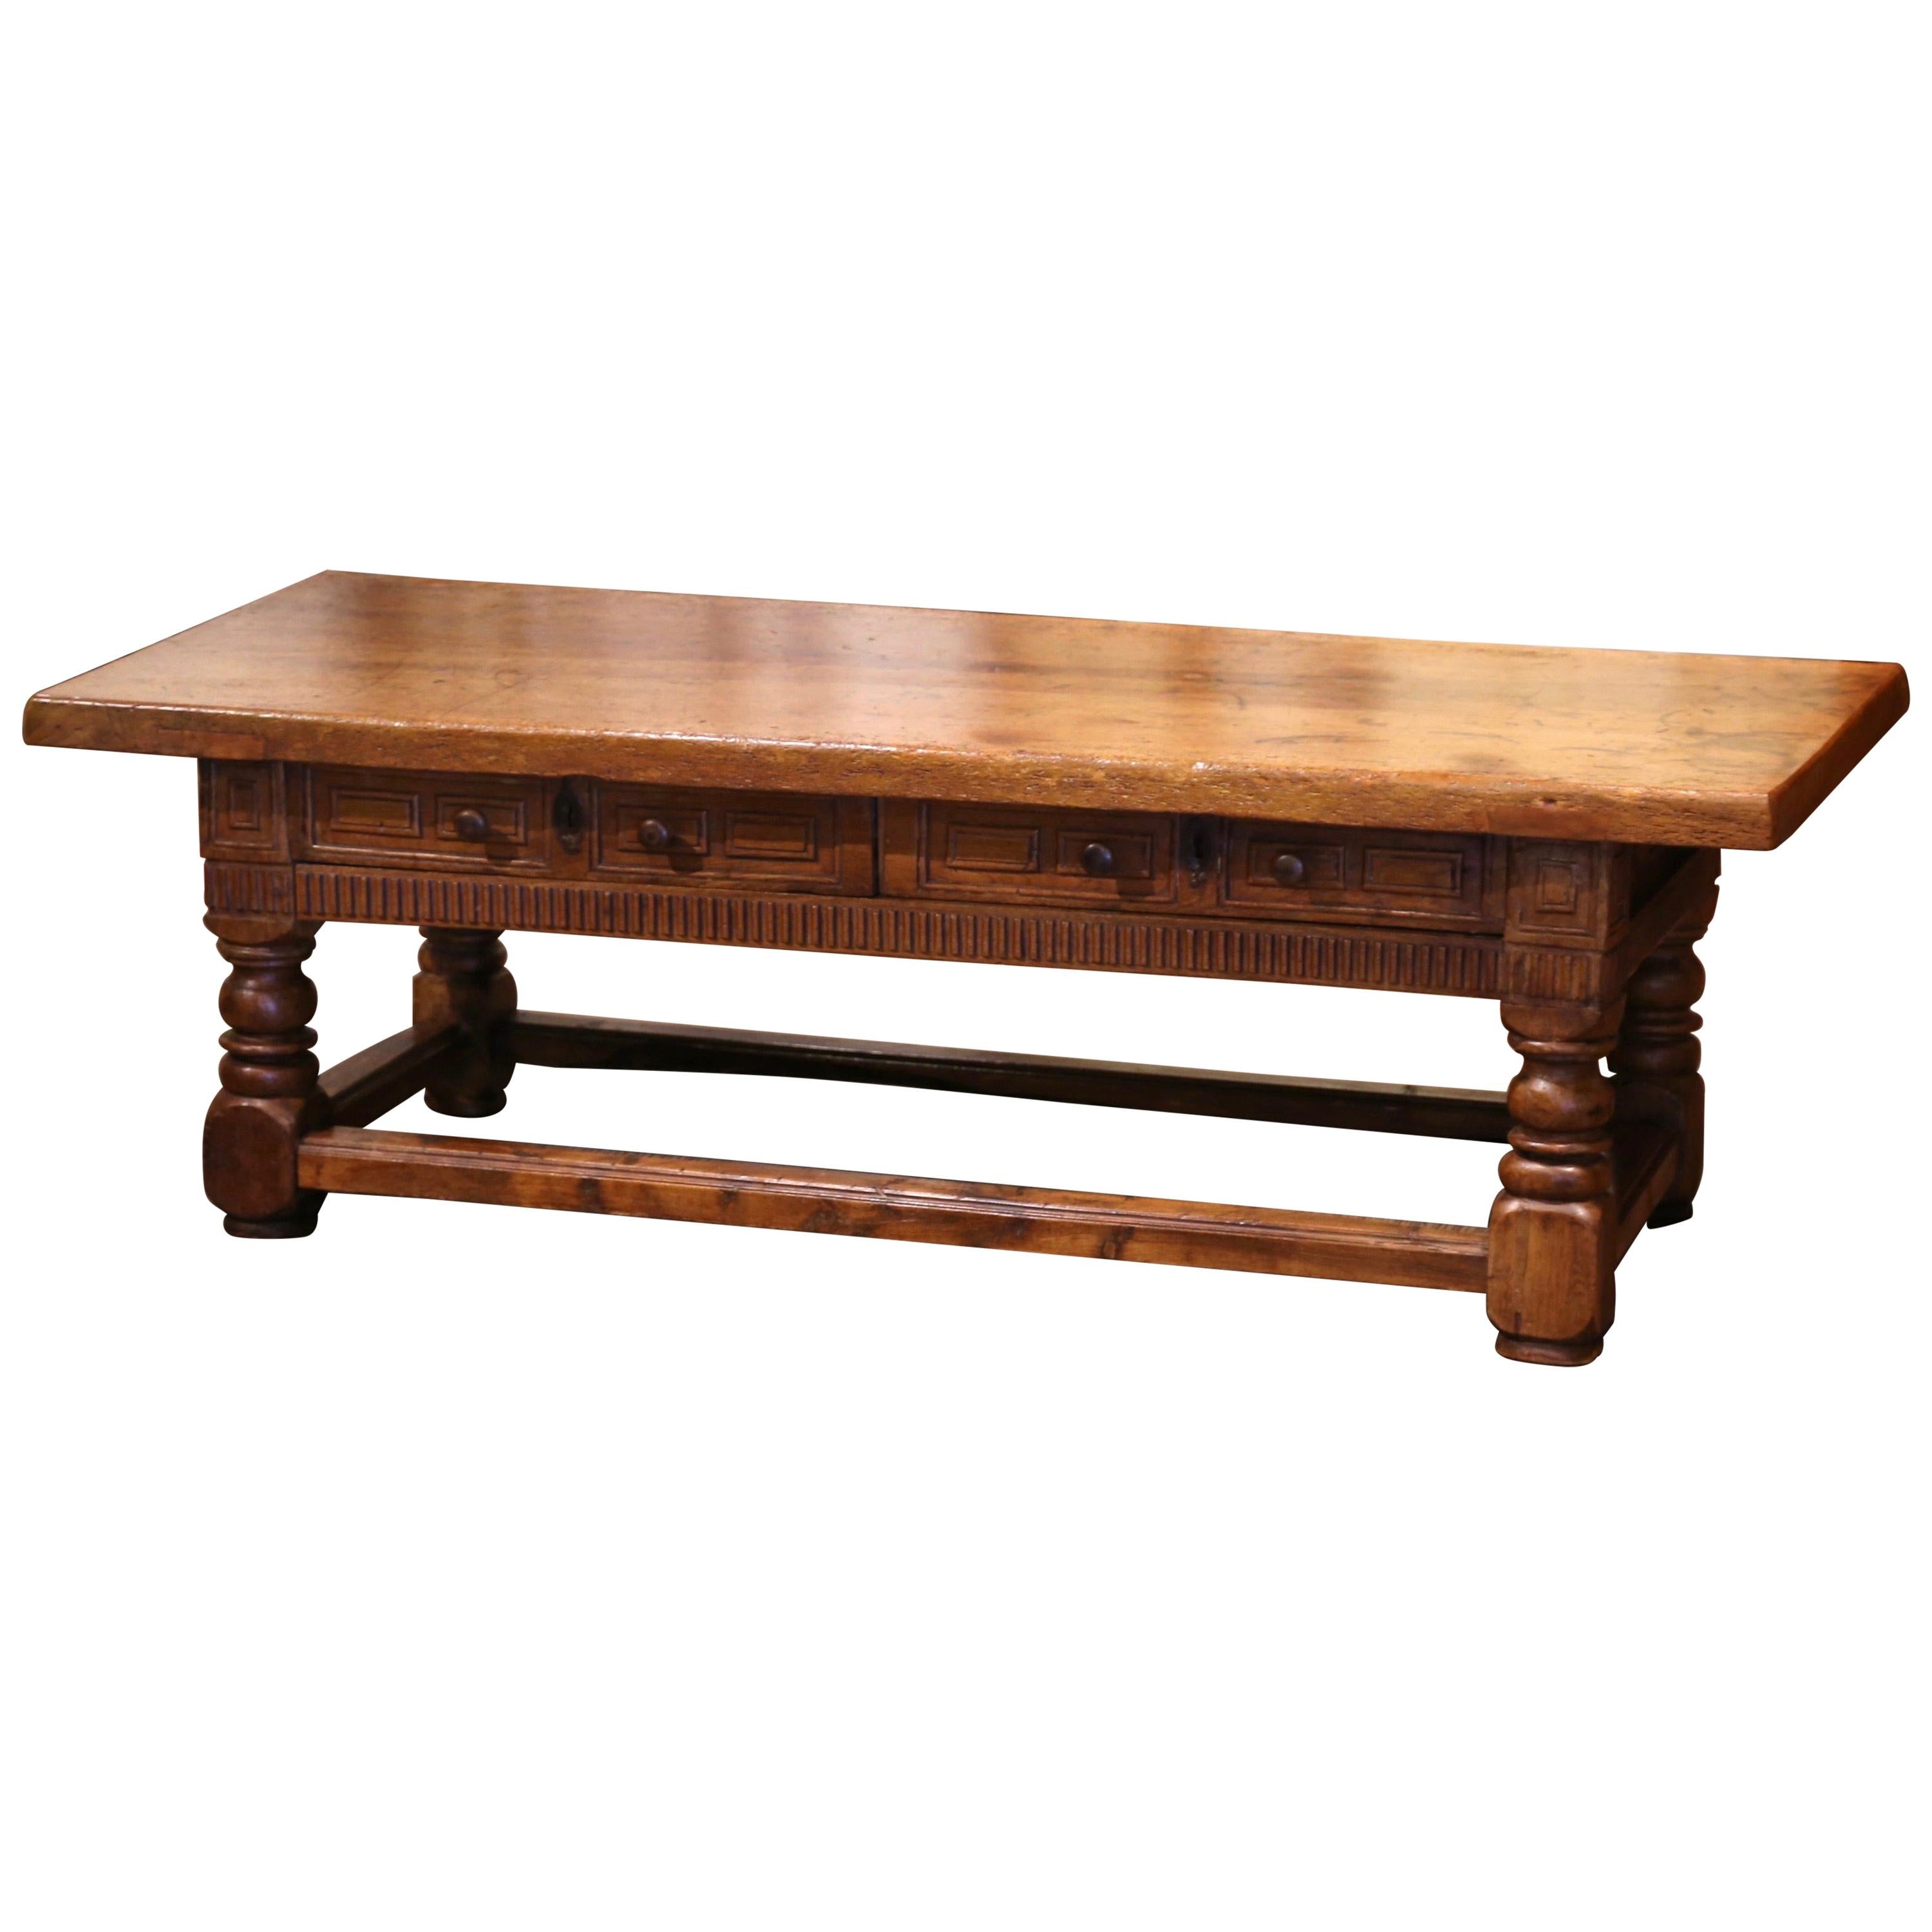 18th Century French Louis XIII Carved Walnut Coffee Table with Drawers